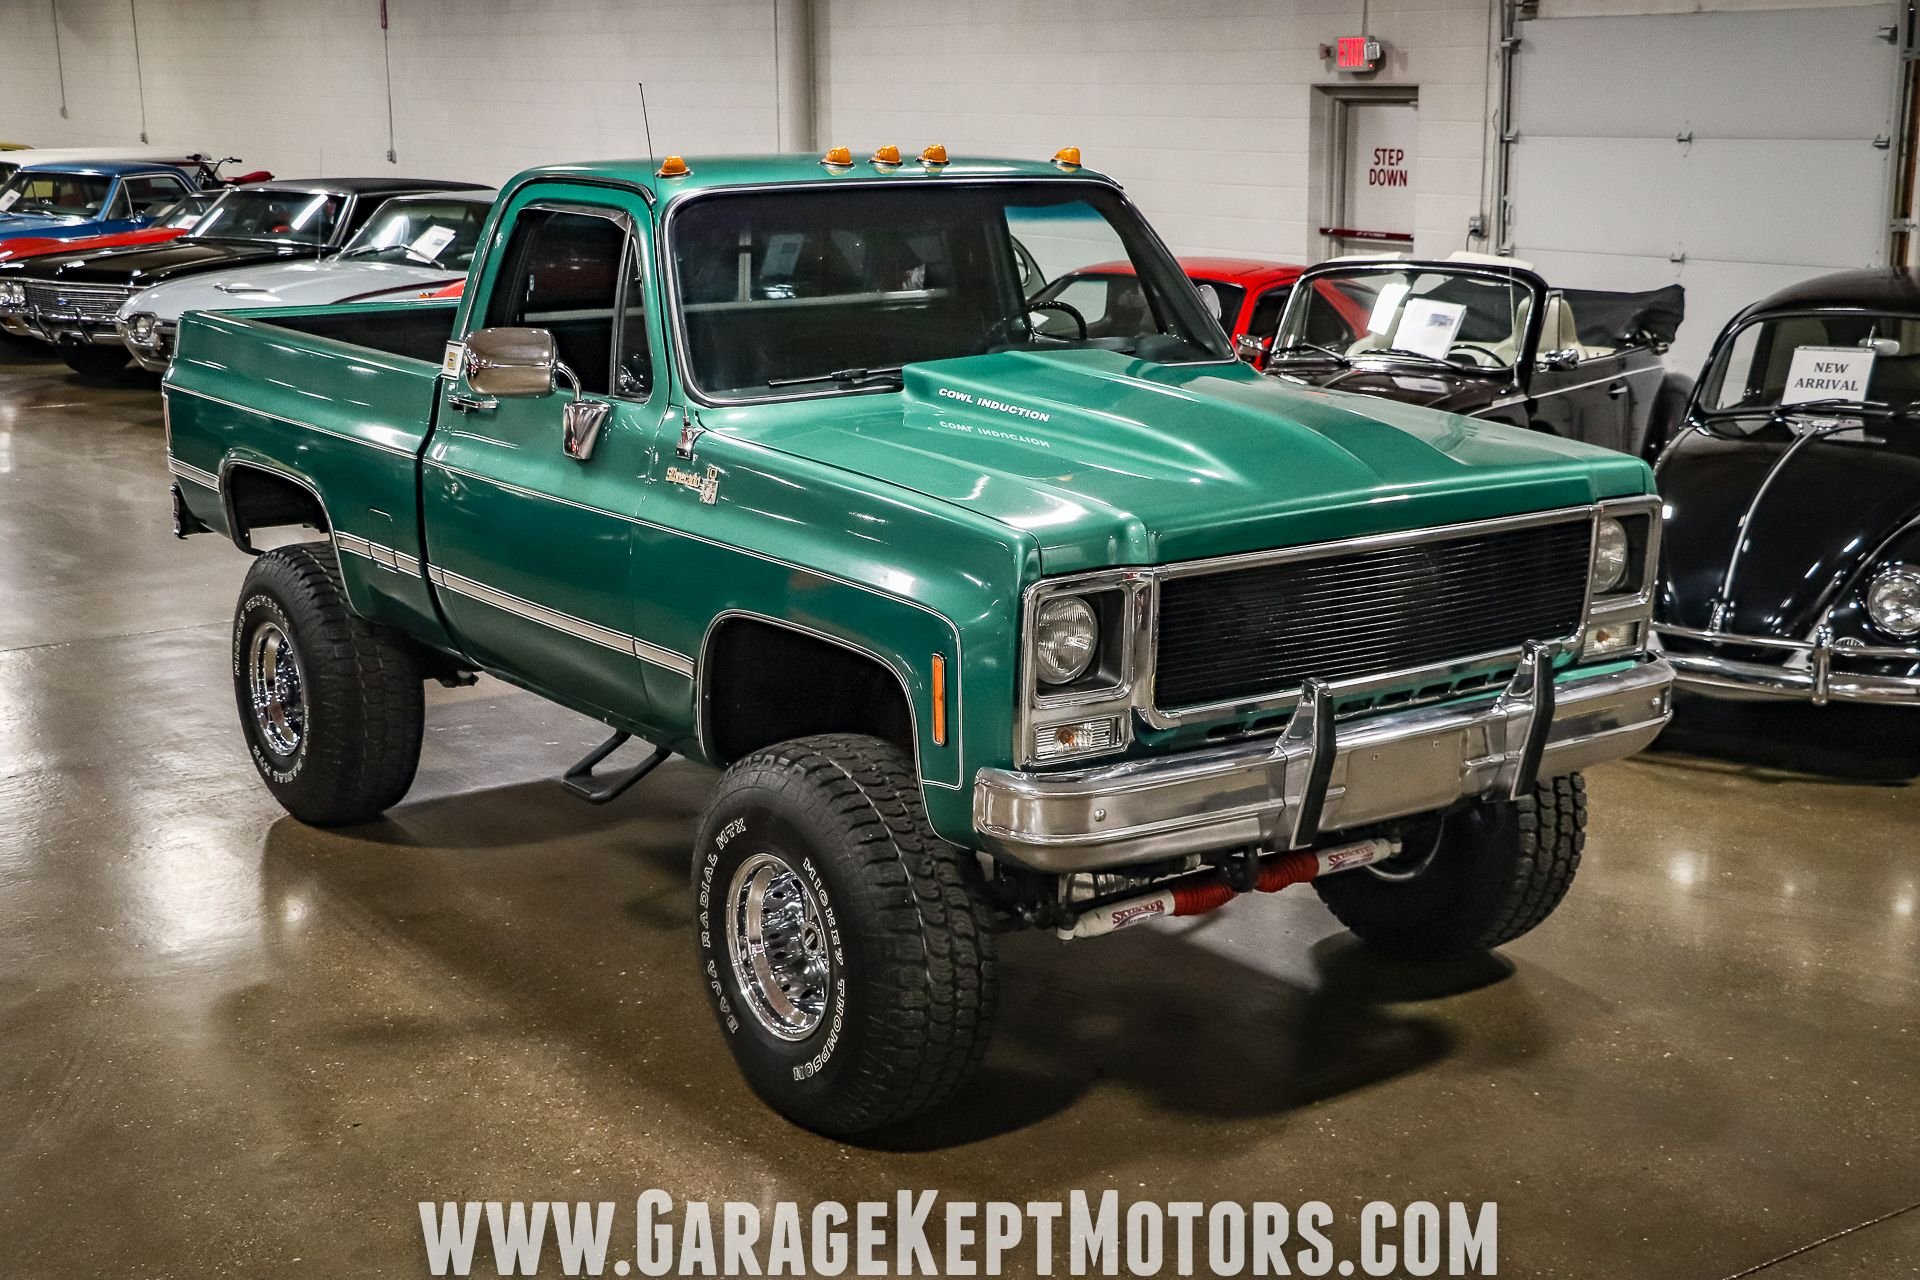 1979 chevy truck lifted